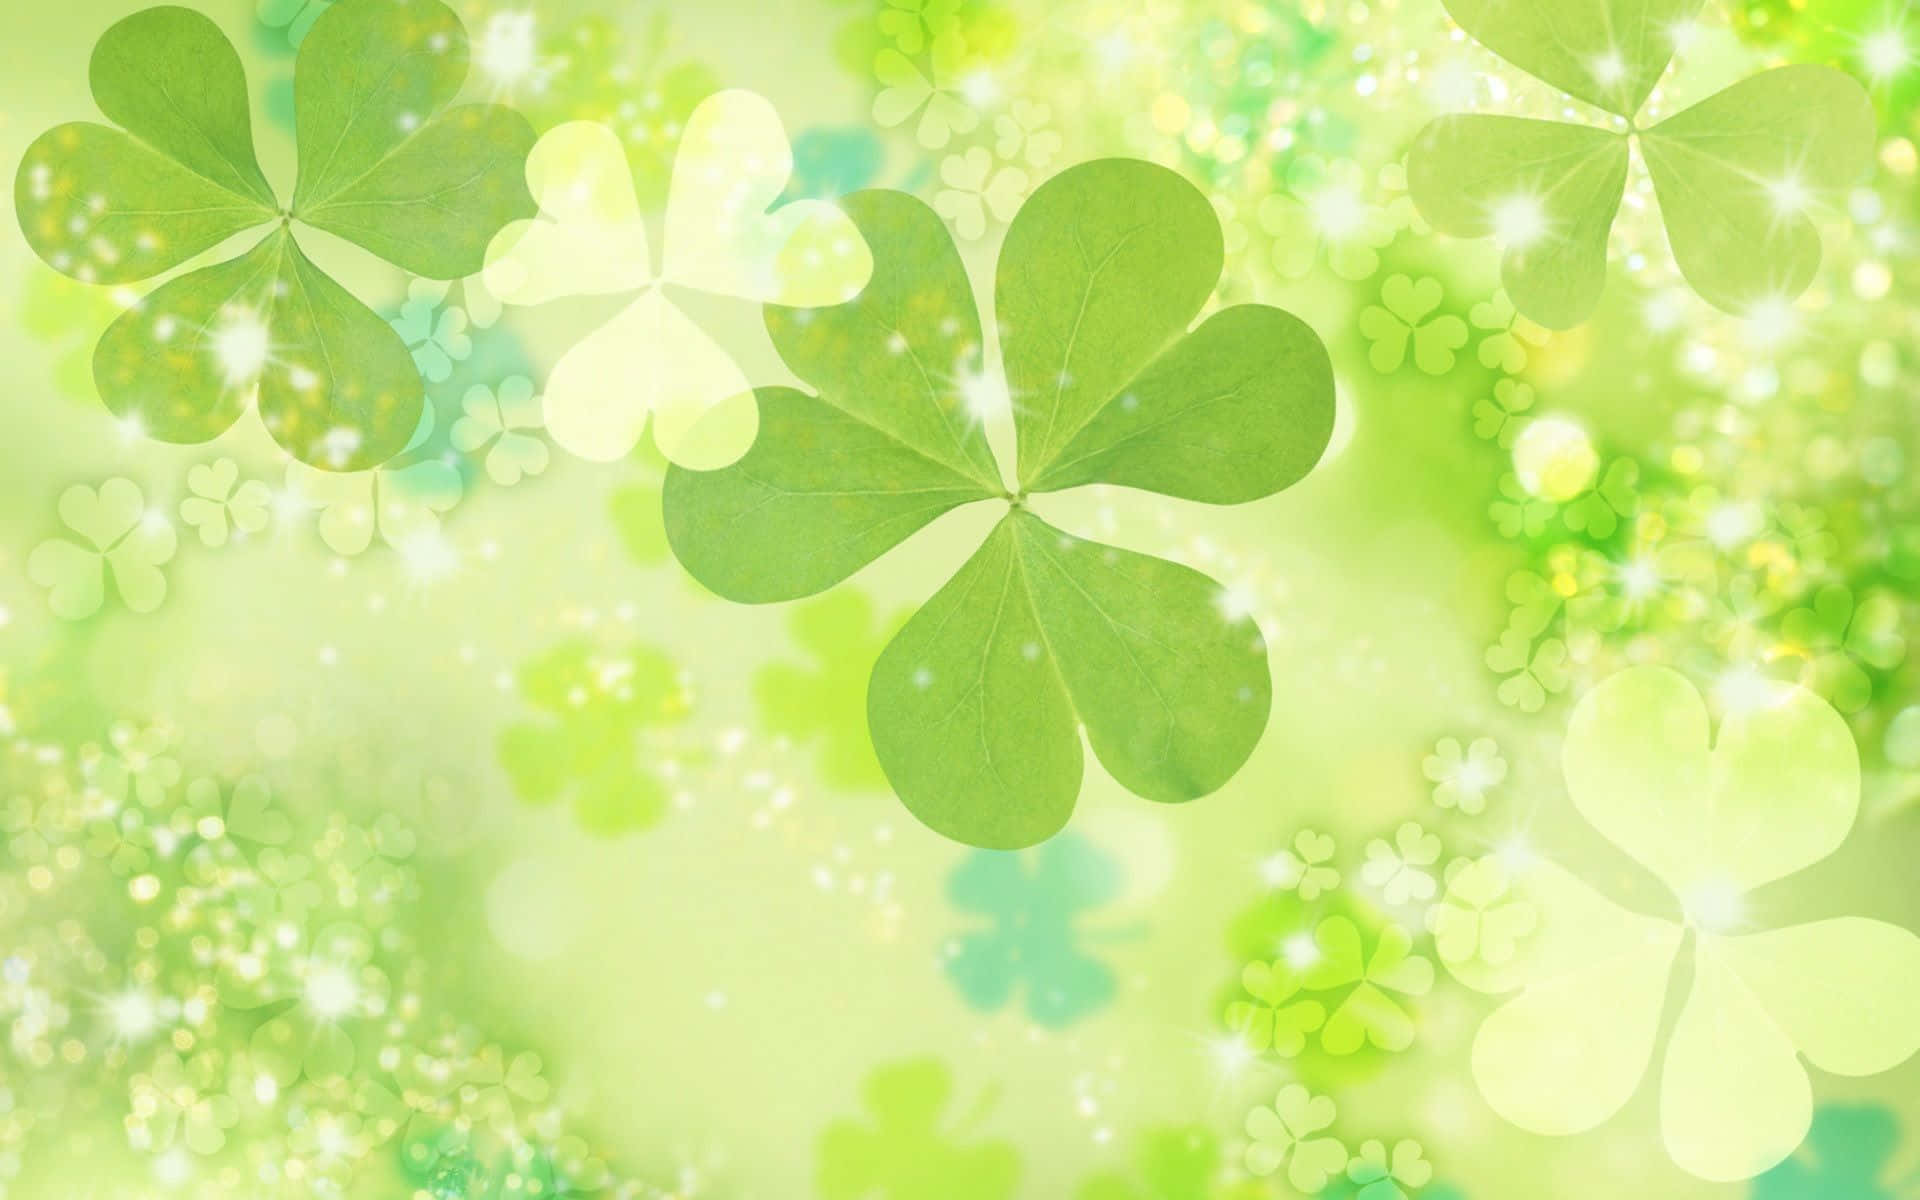 Celebrate St. Patrick's Day with this vibrant shamrock! Wallpaper